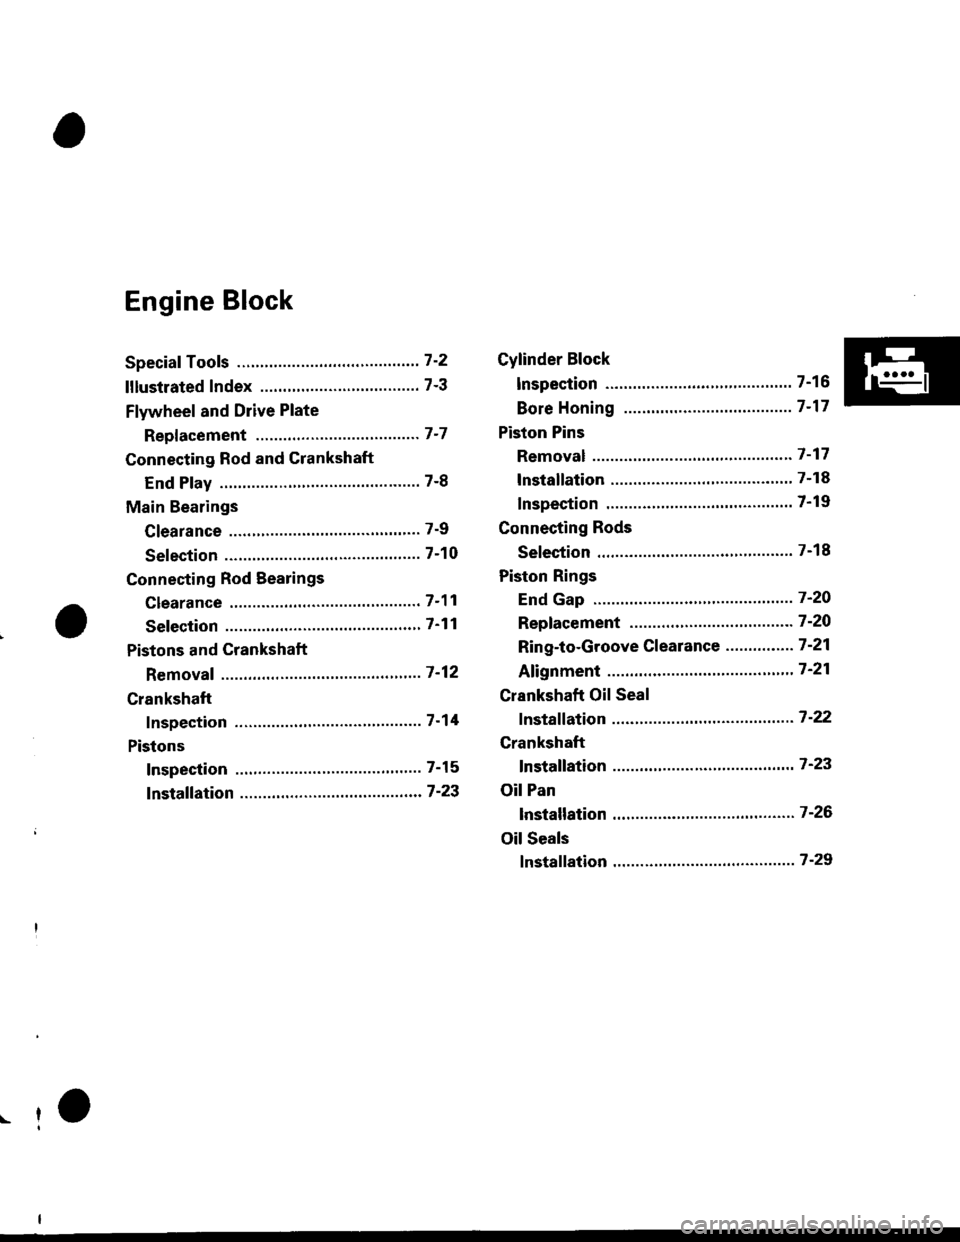 HONDA CIVIC 2000 6.G Service Manual Engine Block
Speciaf Tools ..........." 7-2
lllustlated Index ...................."............ 7-3
Flywheel and Drive Plate
Repf acement """. 7-7
Connecting Rod and Crankshaft
End Play ...........